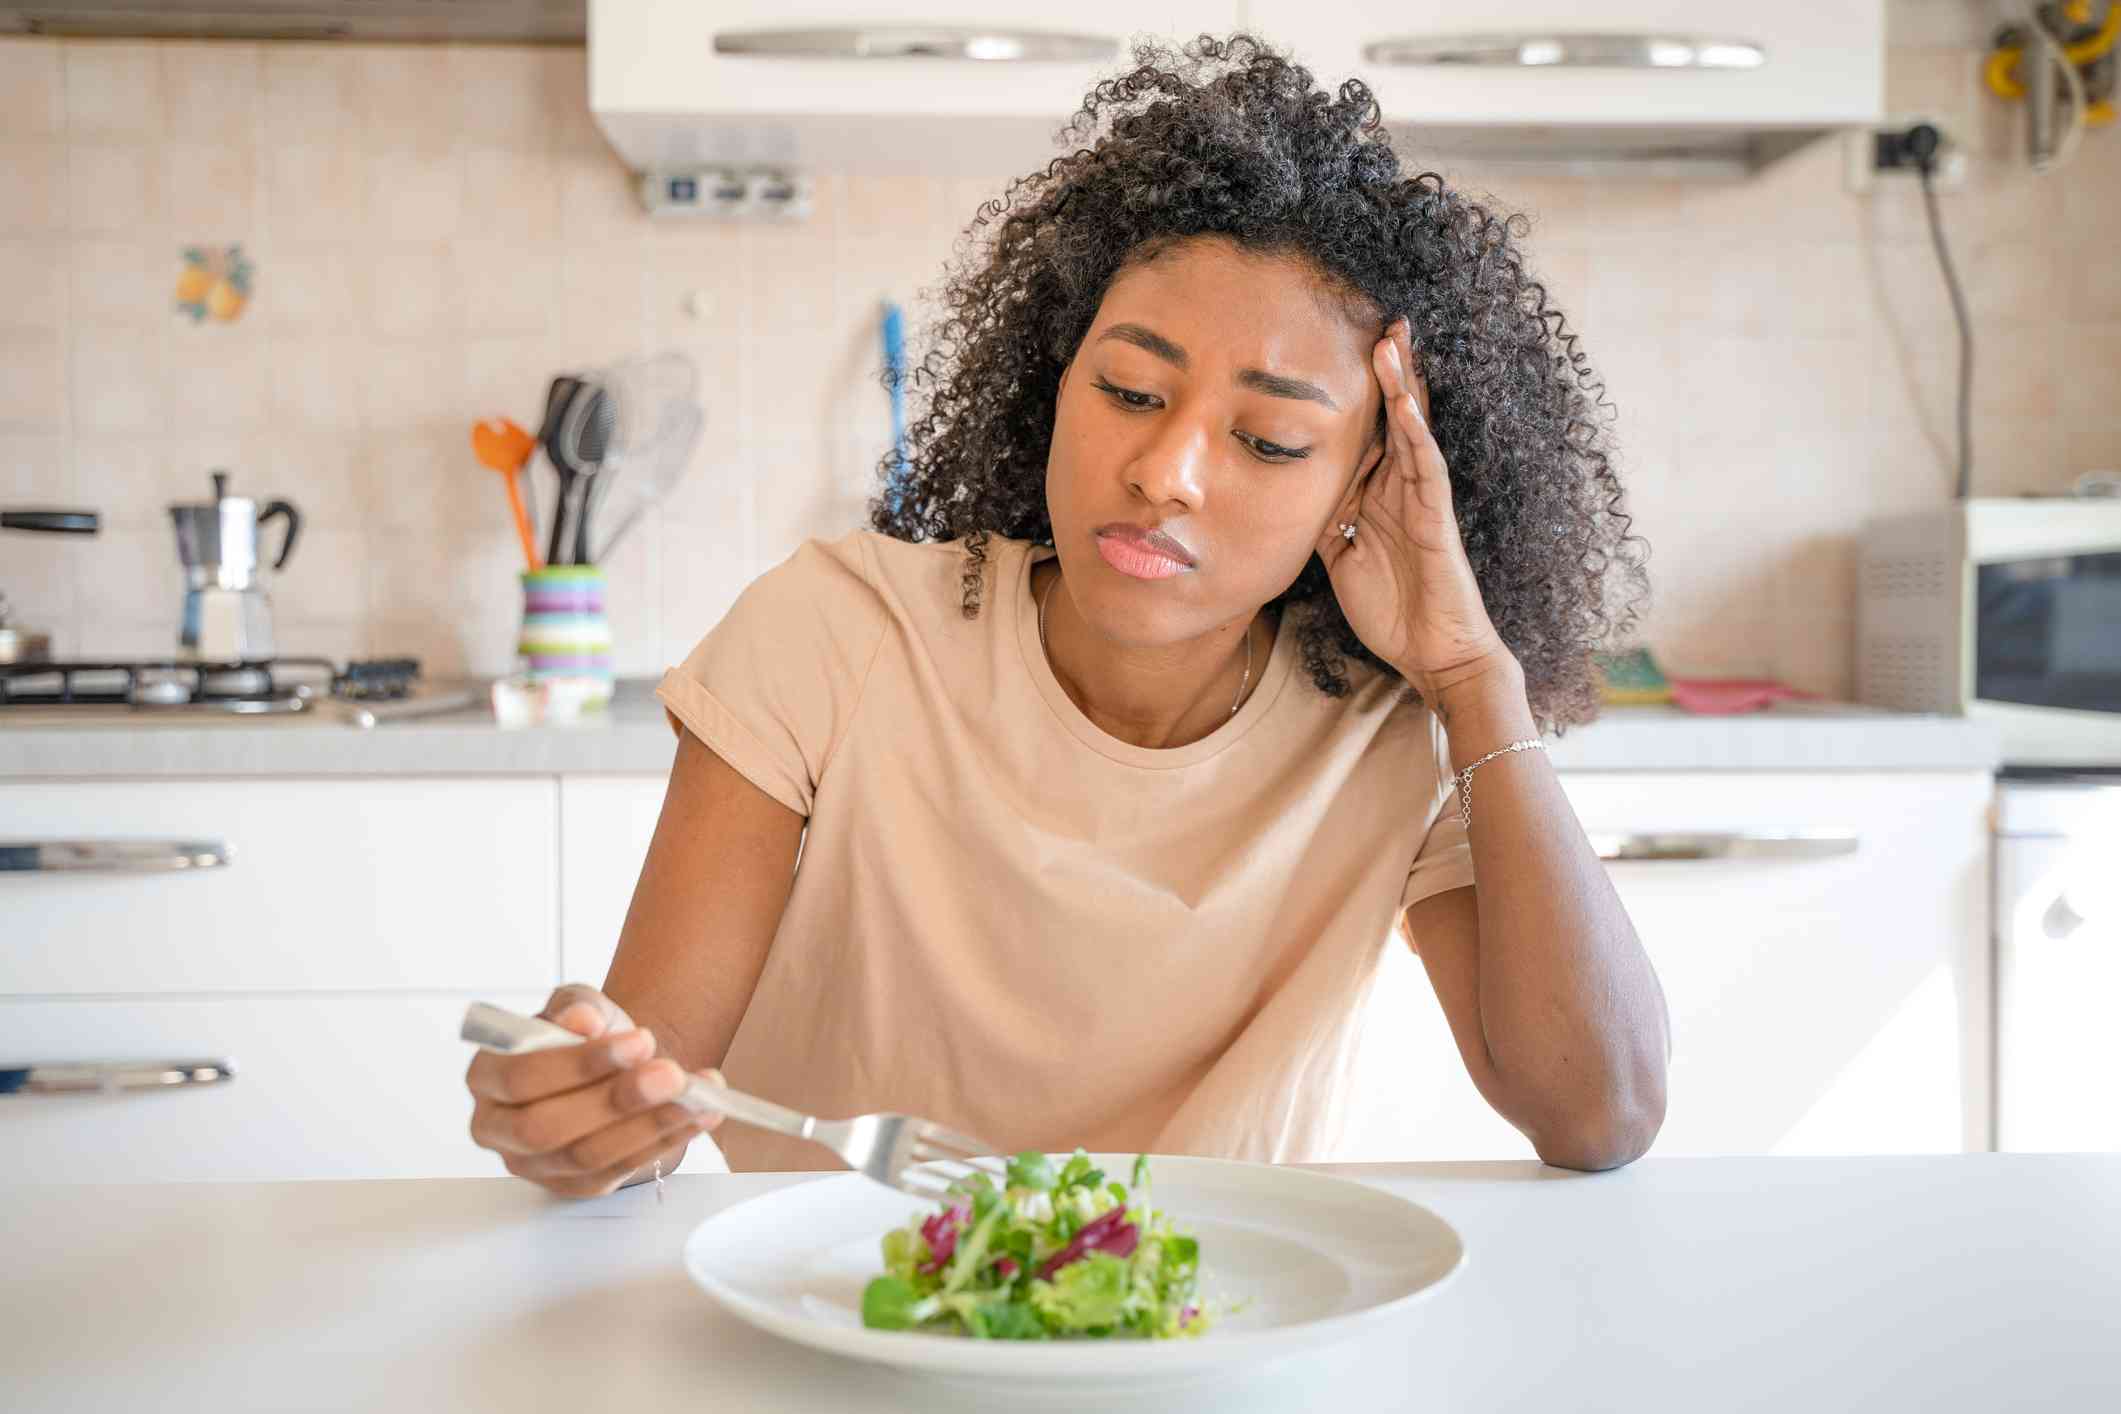 A woman looks upset as she sits at the kitchen table and holds a fork while picking at her food.